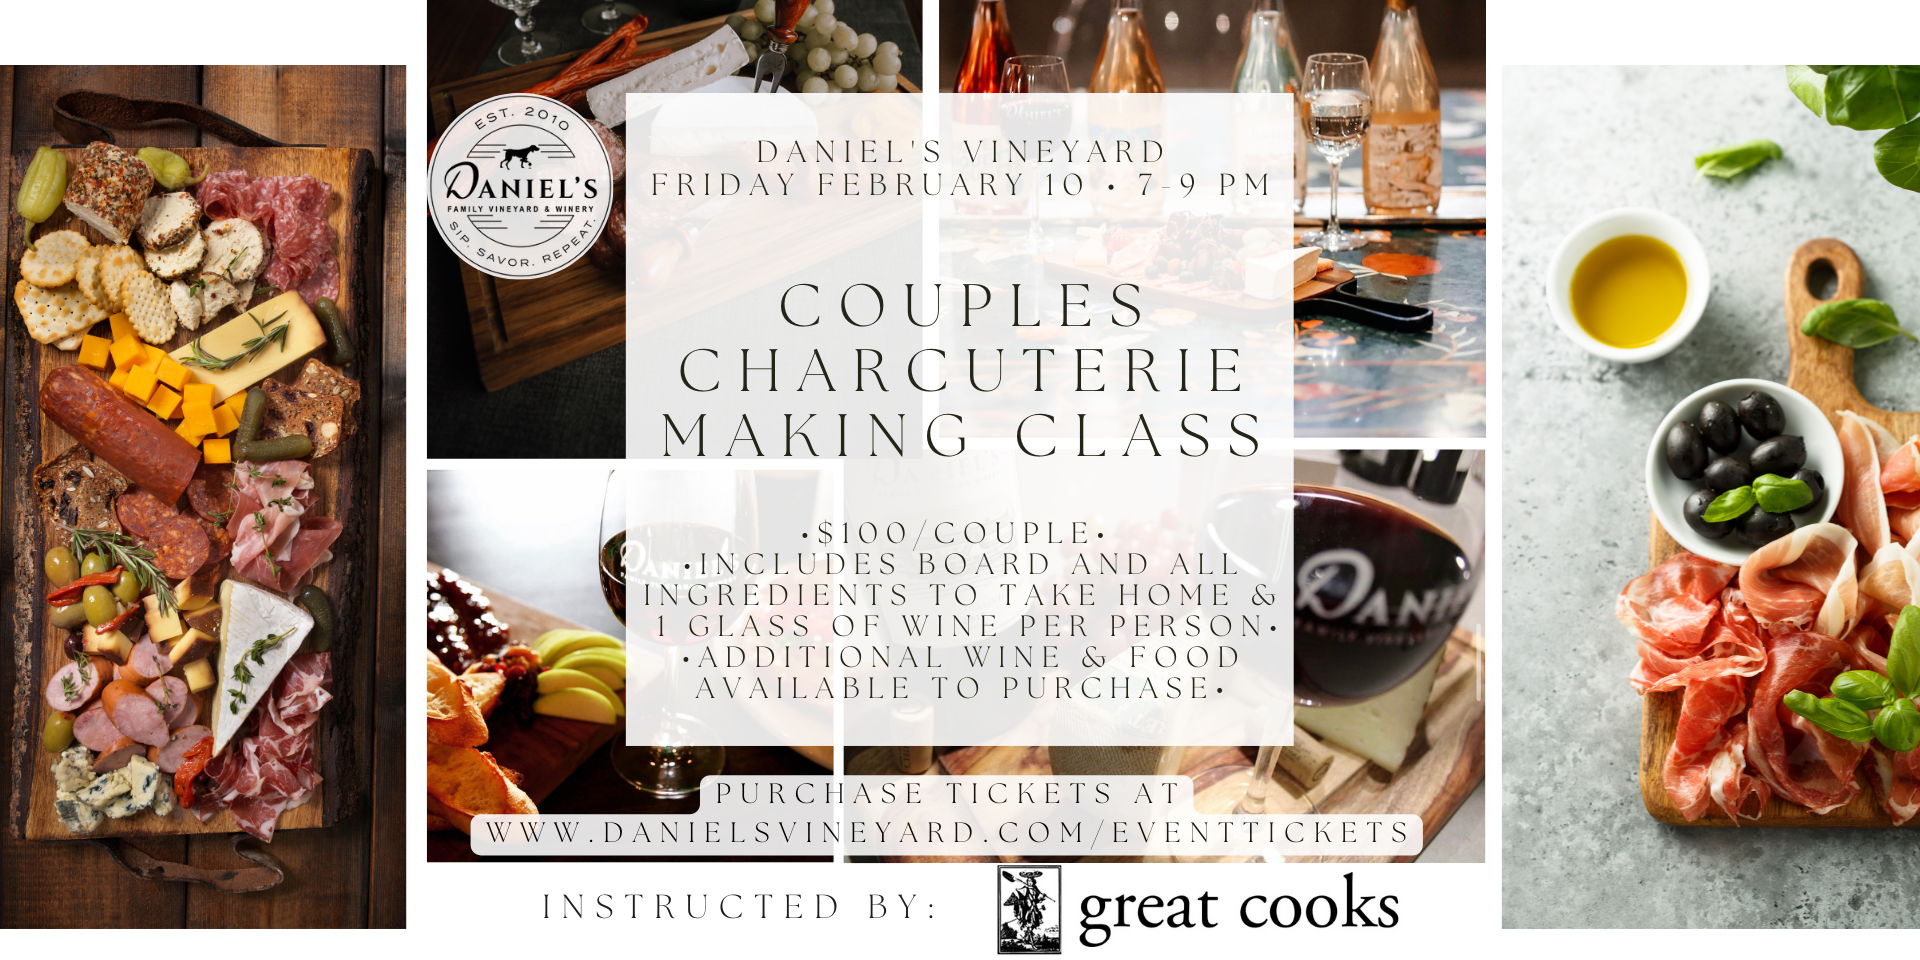 Couples Charcuterie Making Class promotional image